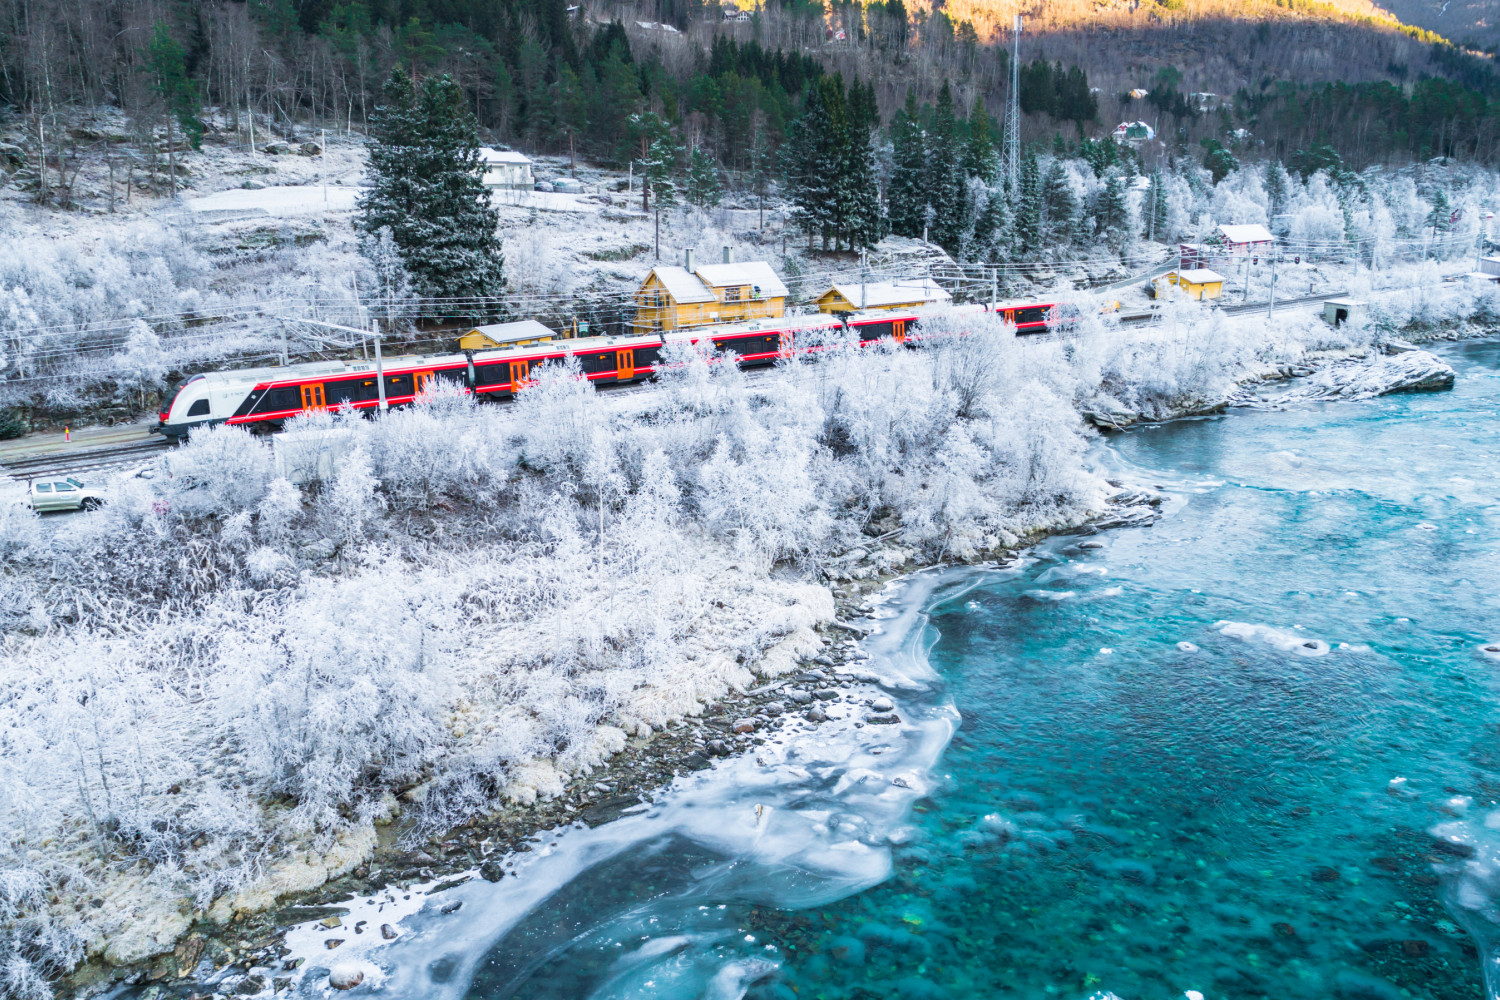 The Oslo-Bergen train in the mountains of Hordaland, Norway.